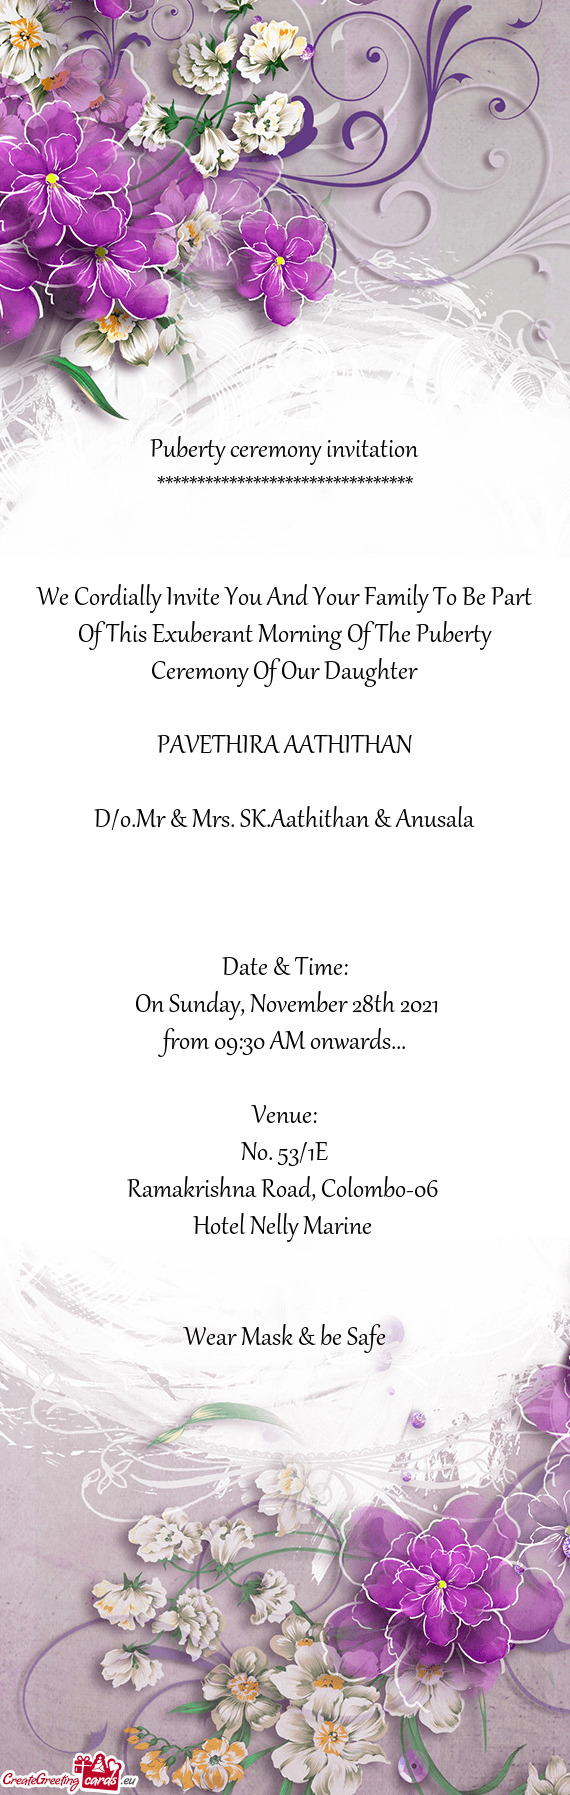 We Cordially Invite You And Your Family To Be Part Of This Exuberant Morning Of The Puberty Ceremony